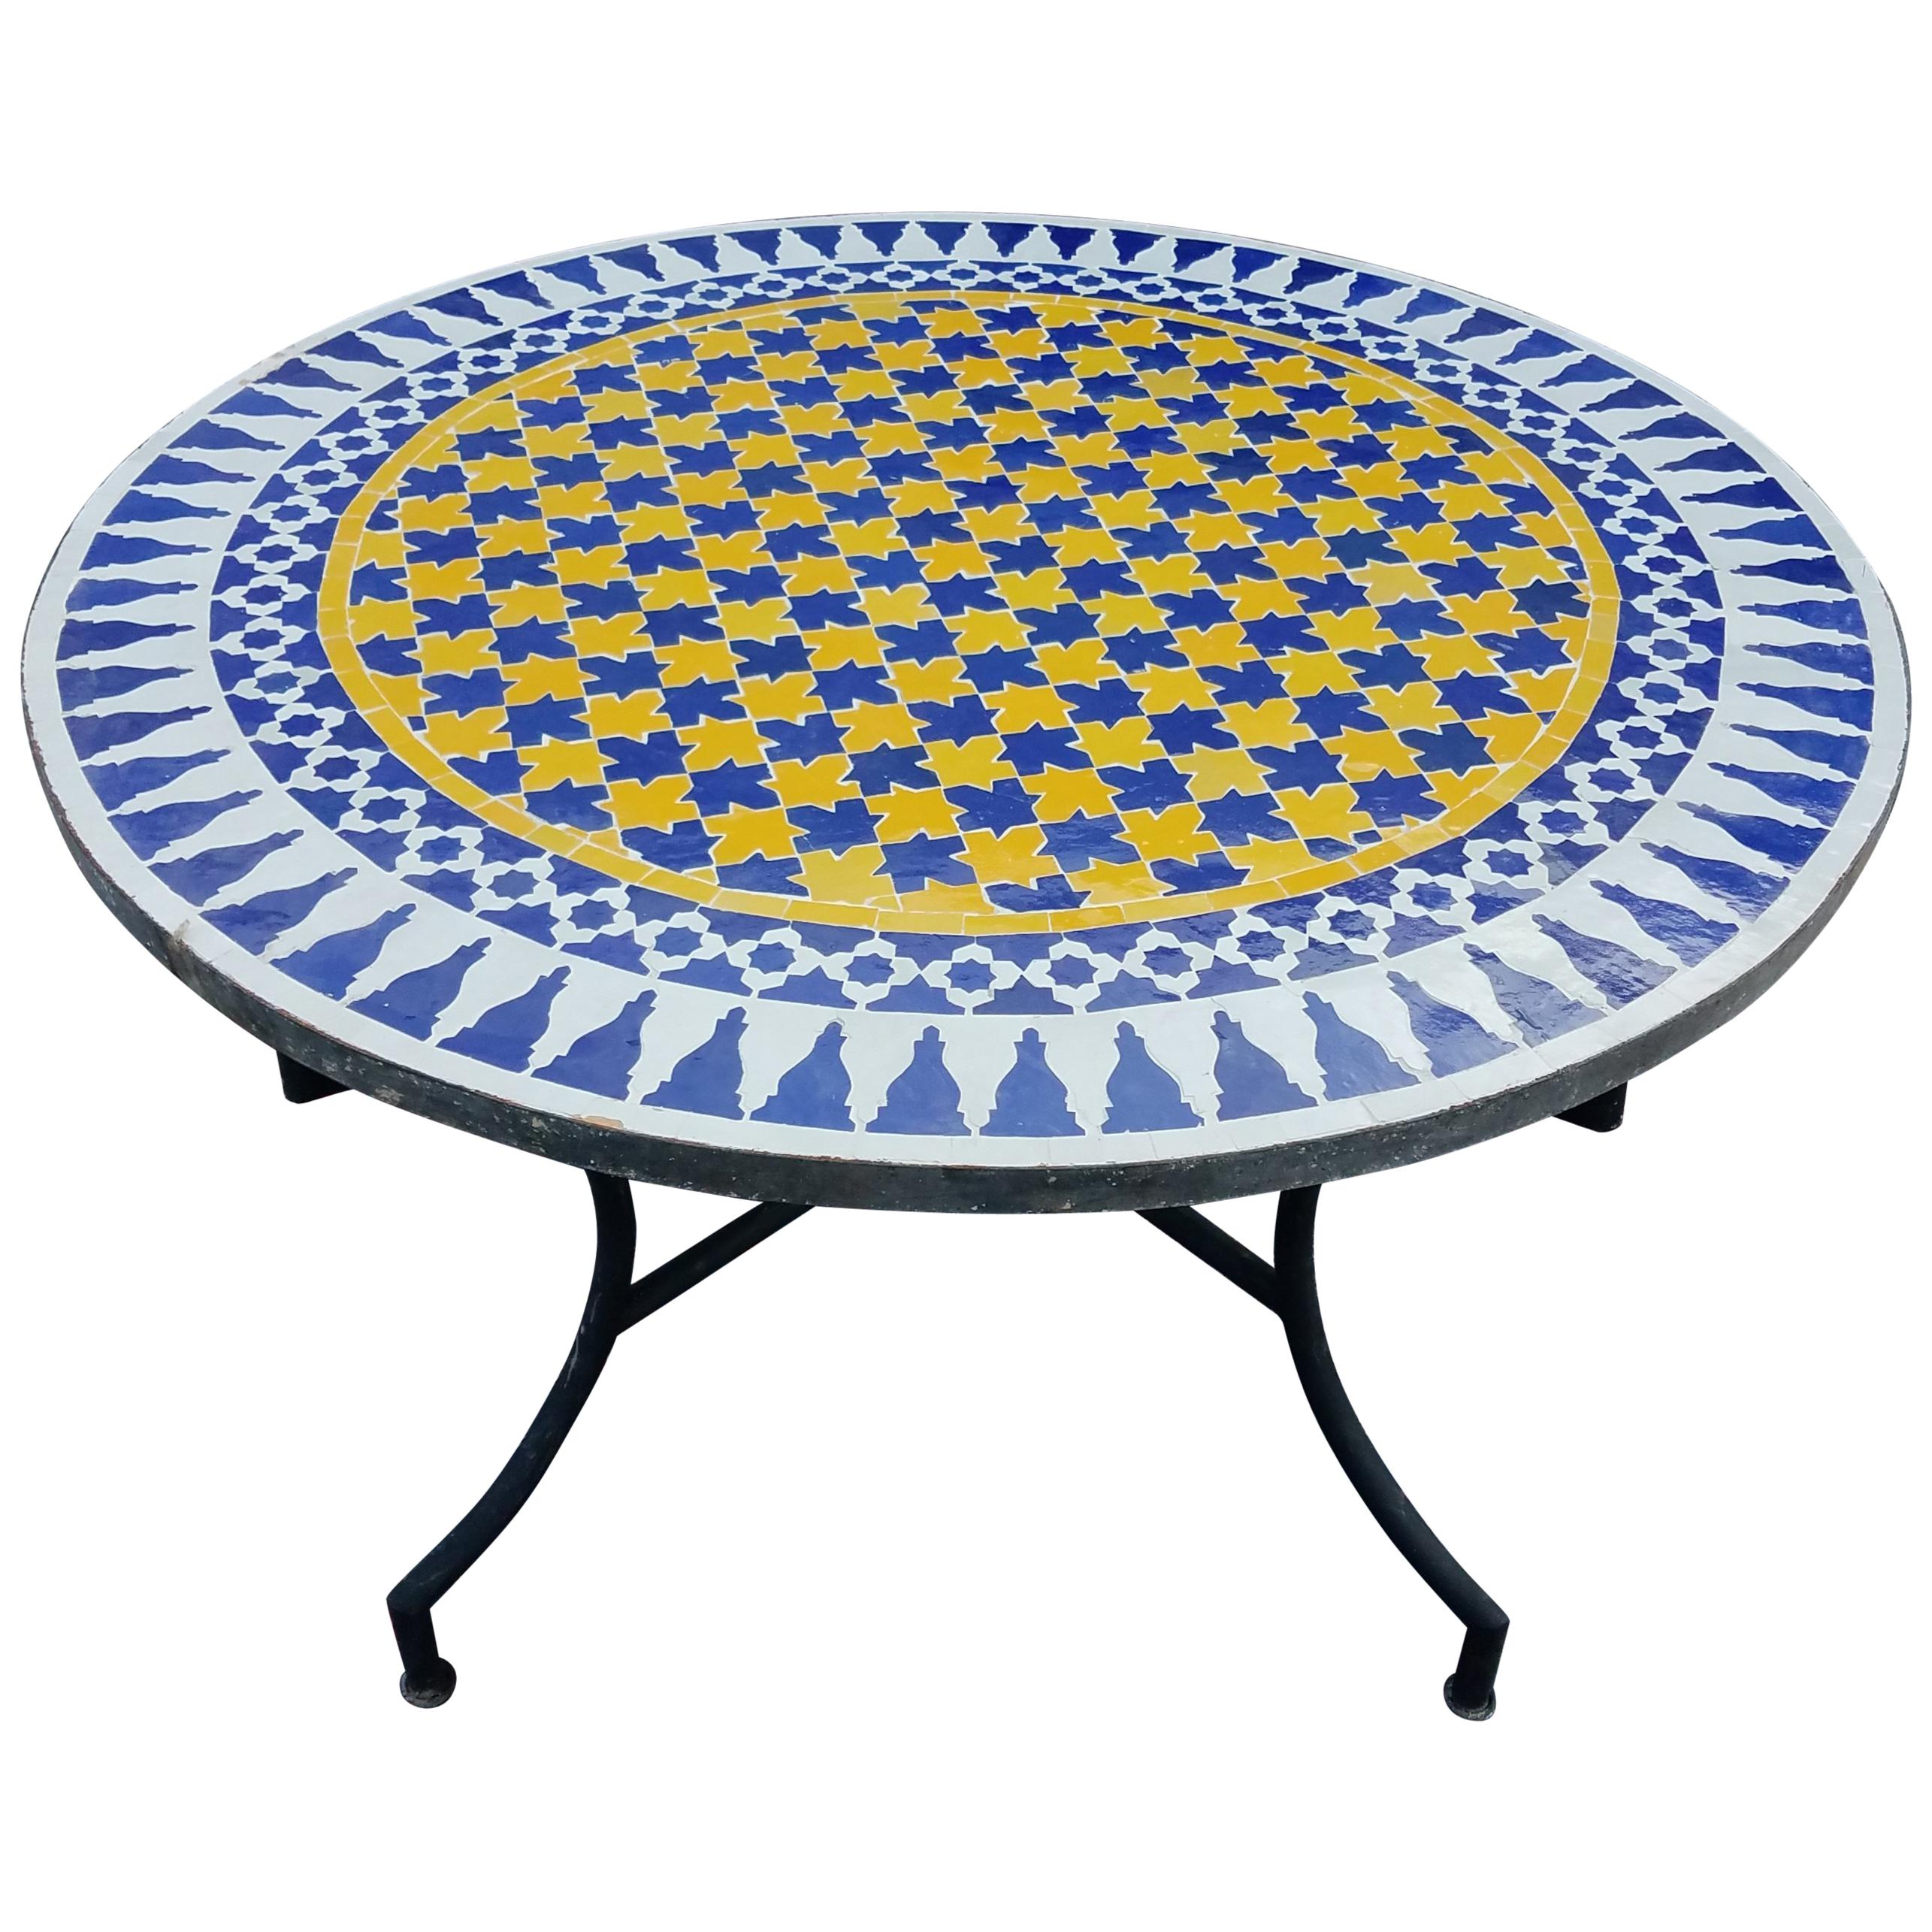 Moroccan Mosaic Table Multicolor Low / High Base Included For Sale